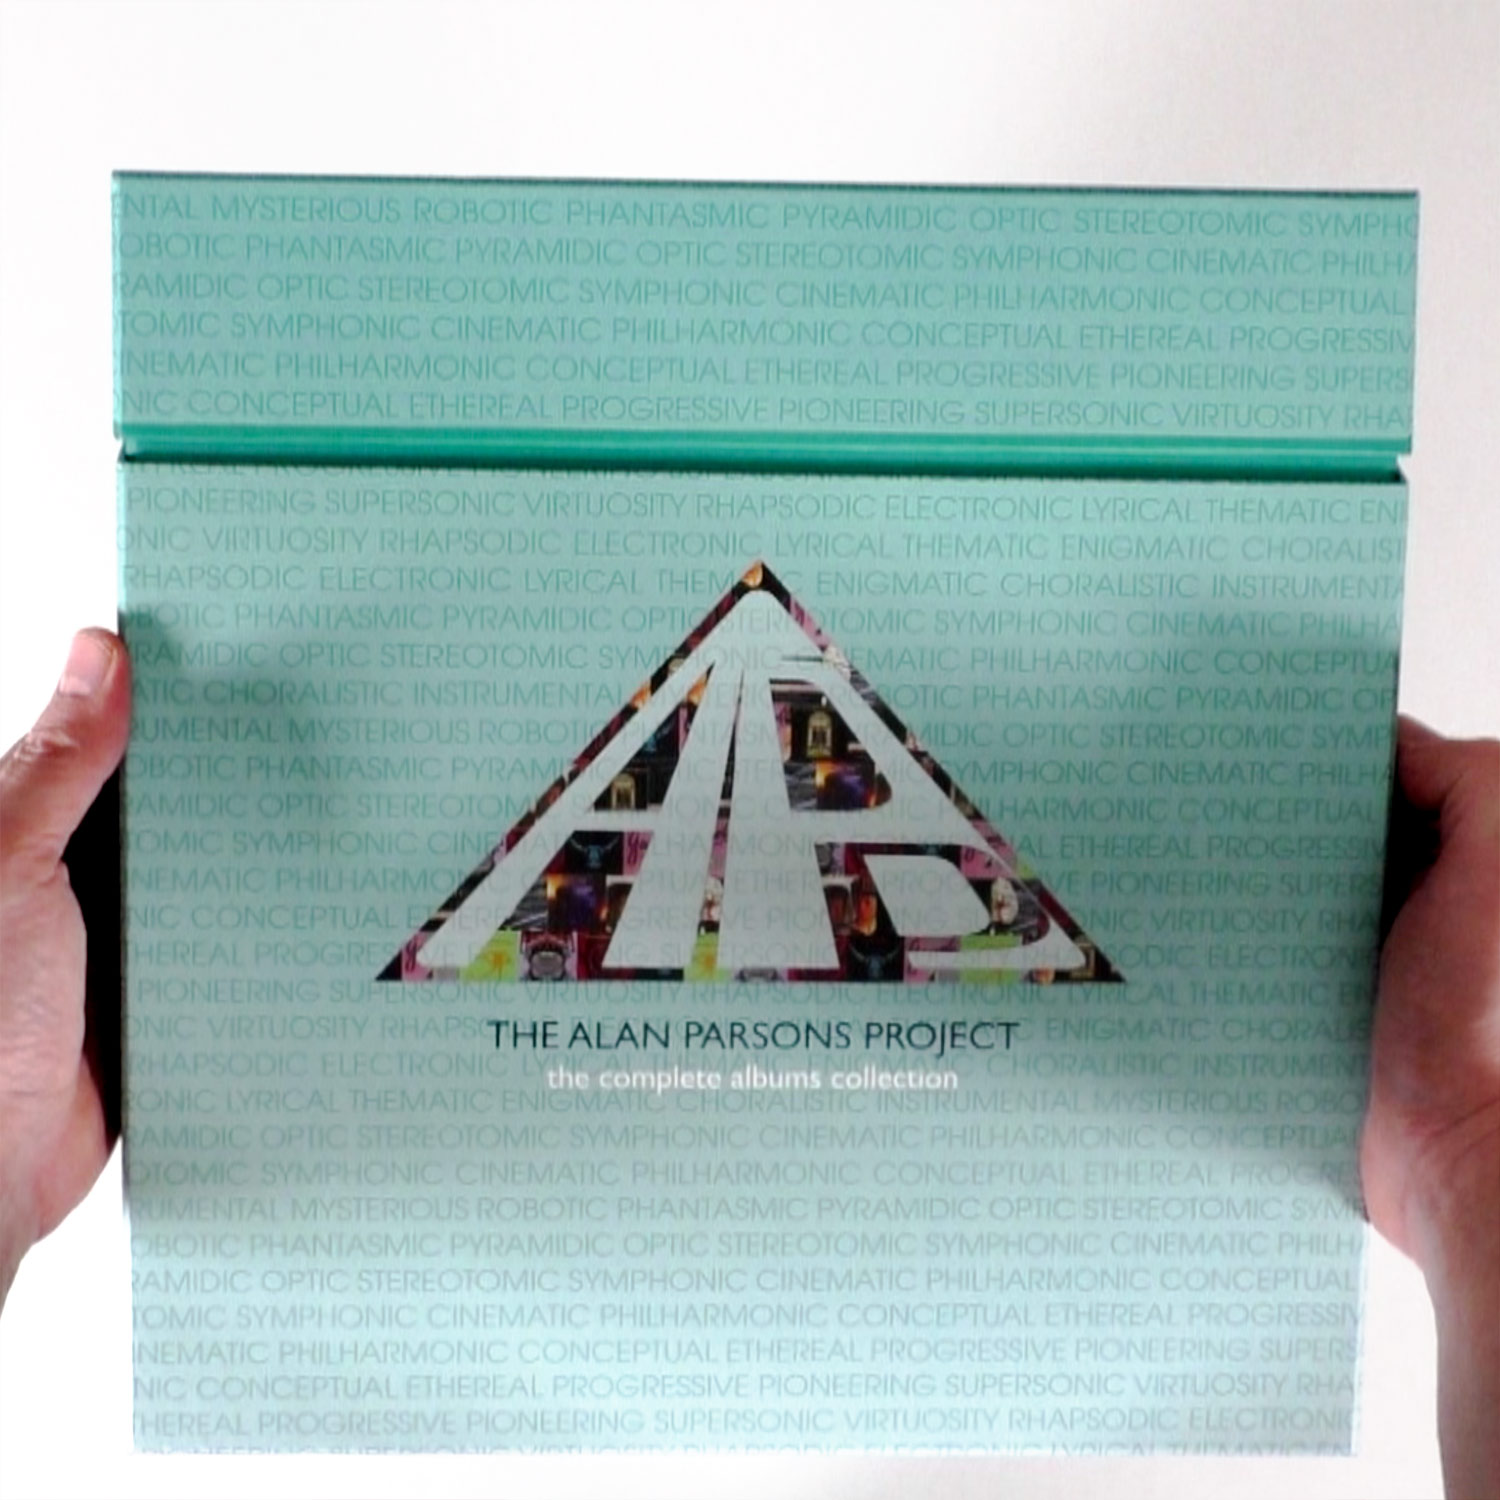 The Alan Parsons Project / The Complete Albums Collection 11LP vinyl box - unboxing video